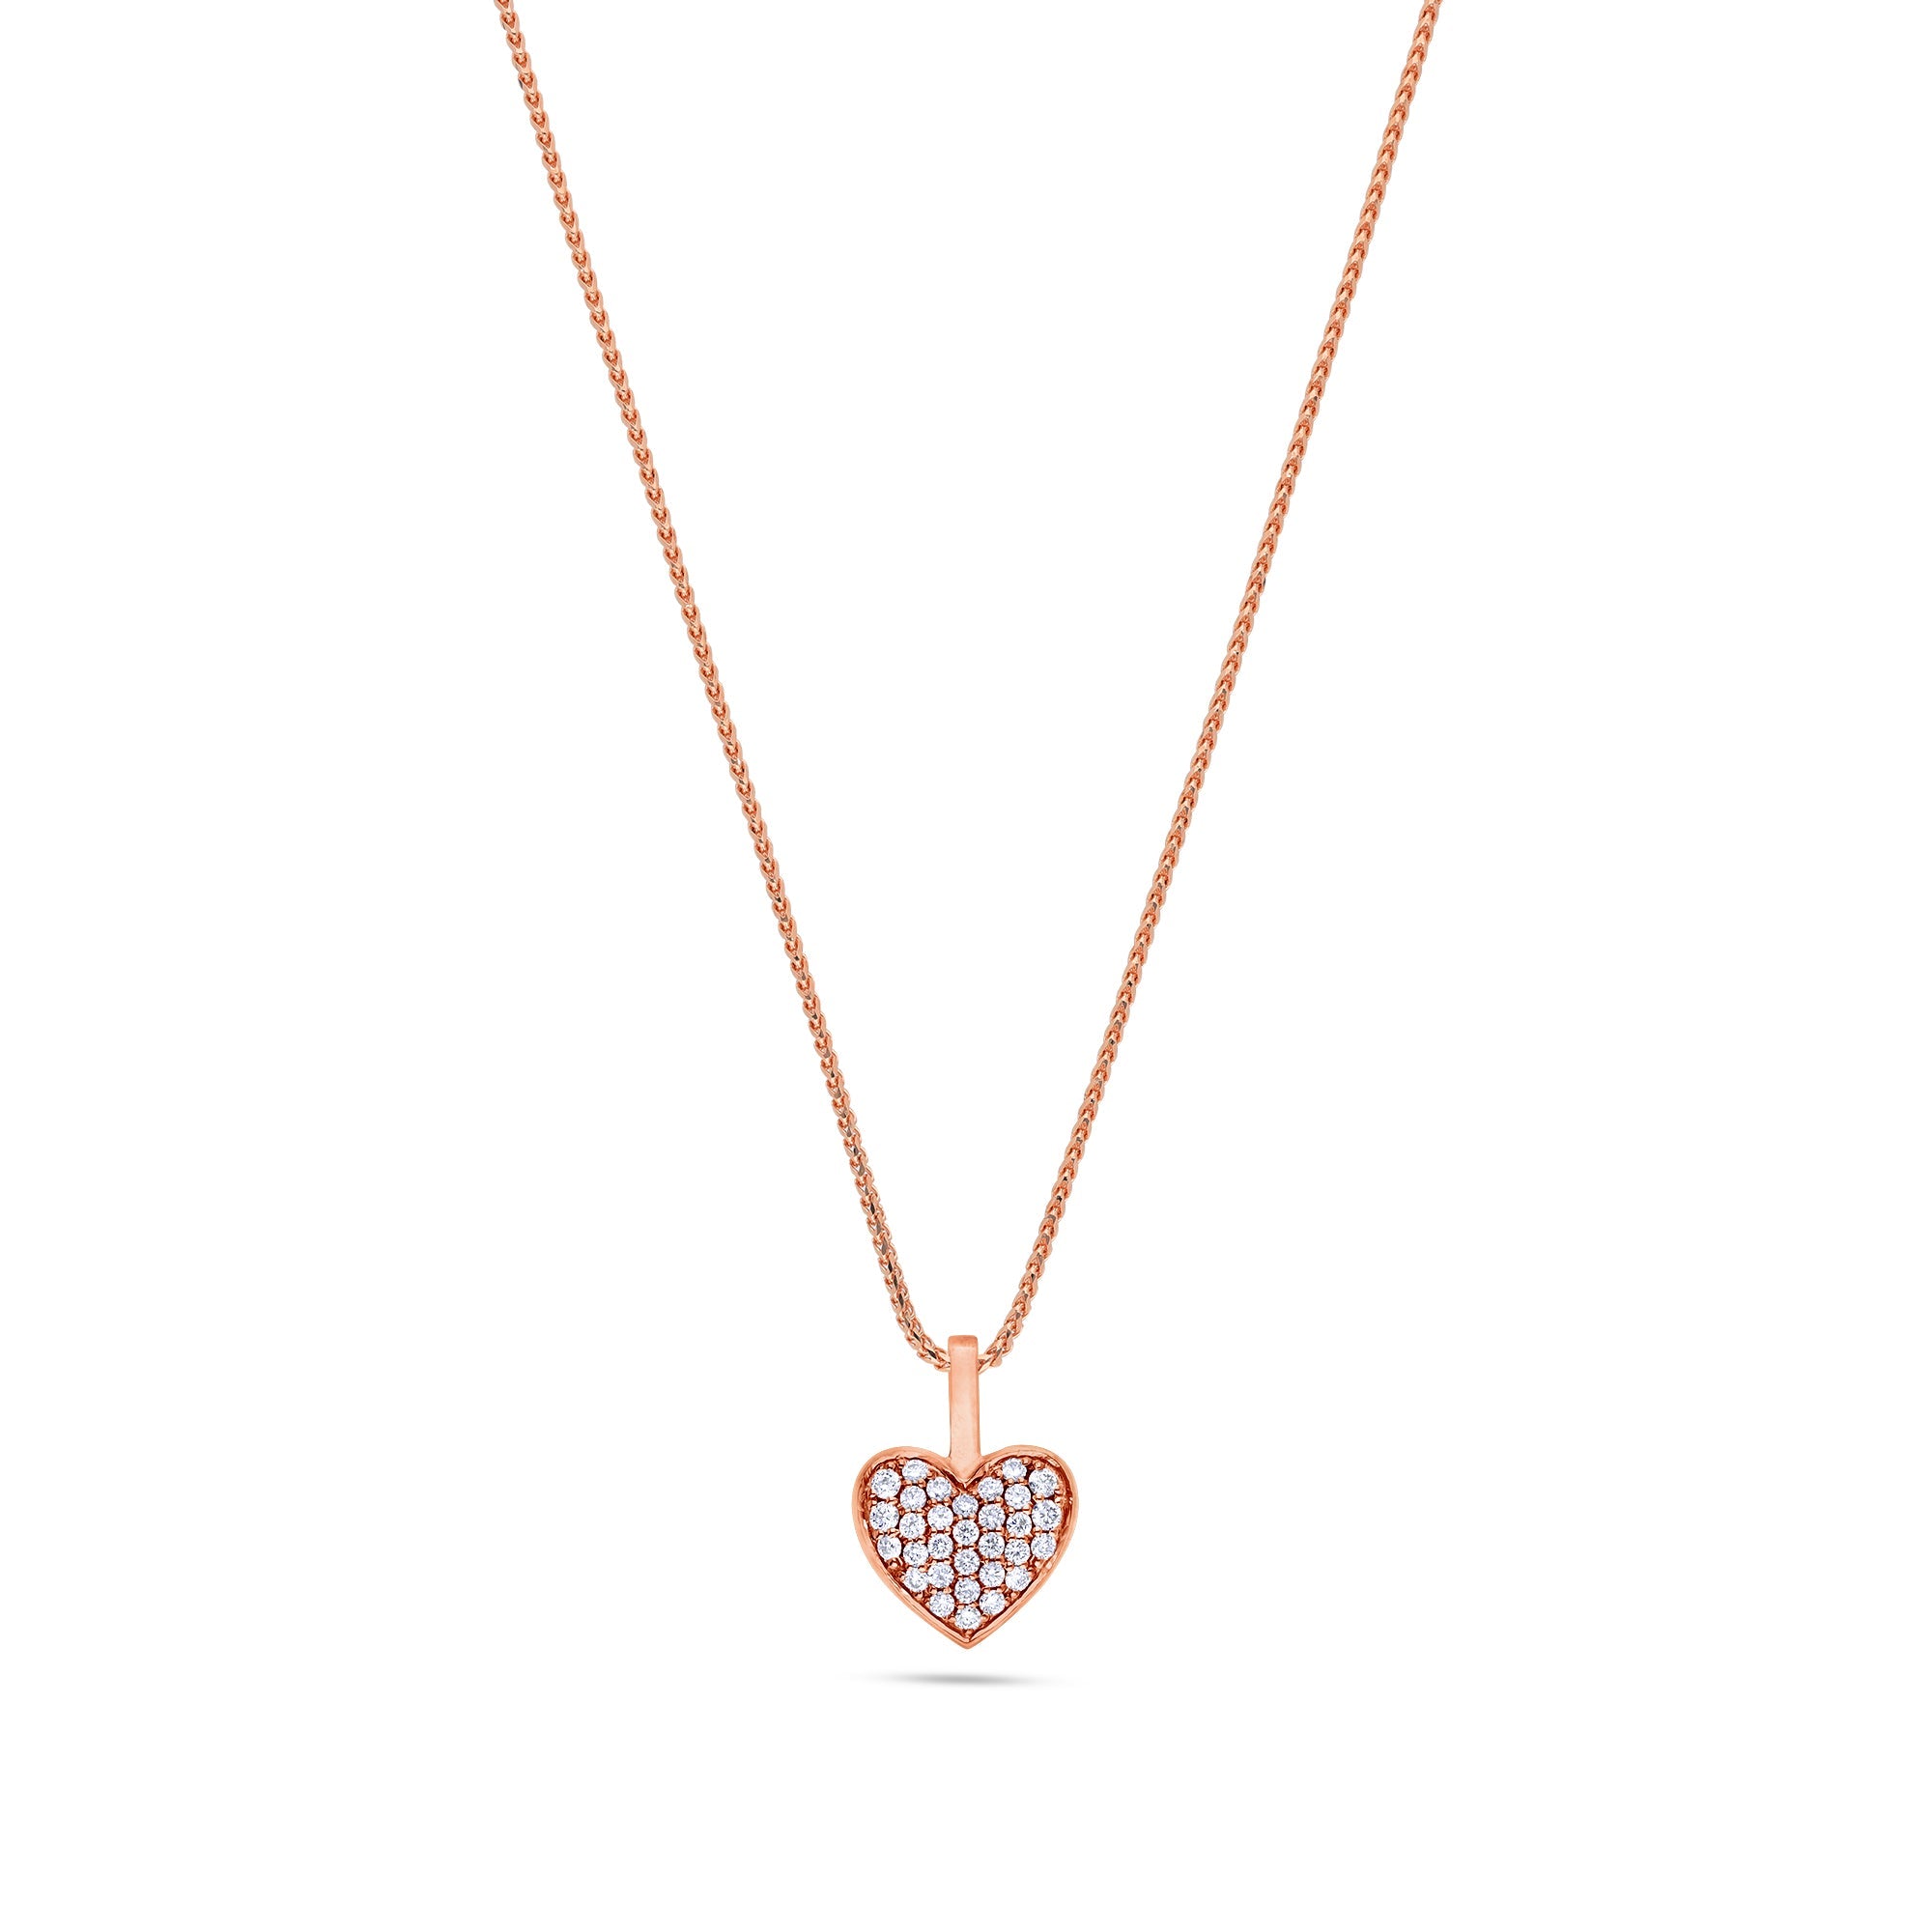 Pico Heart Necklace (14K YELLOW GOLD) - IF & Co. Custom Jewelers